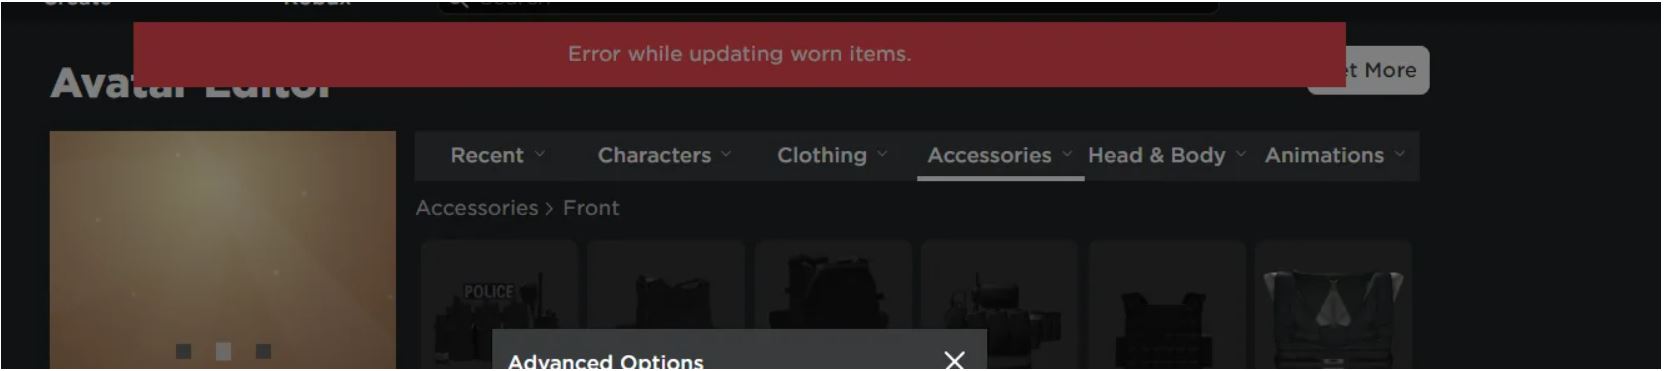 Learn how to fix error while updating worn items.